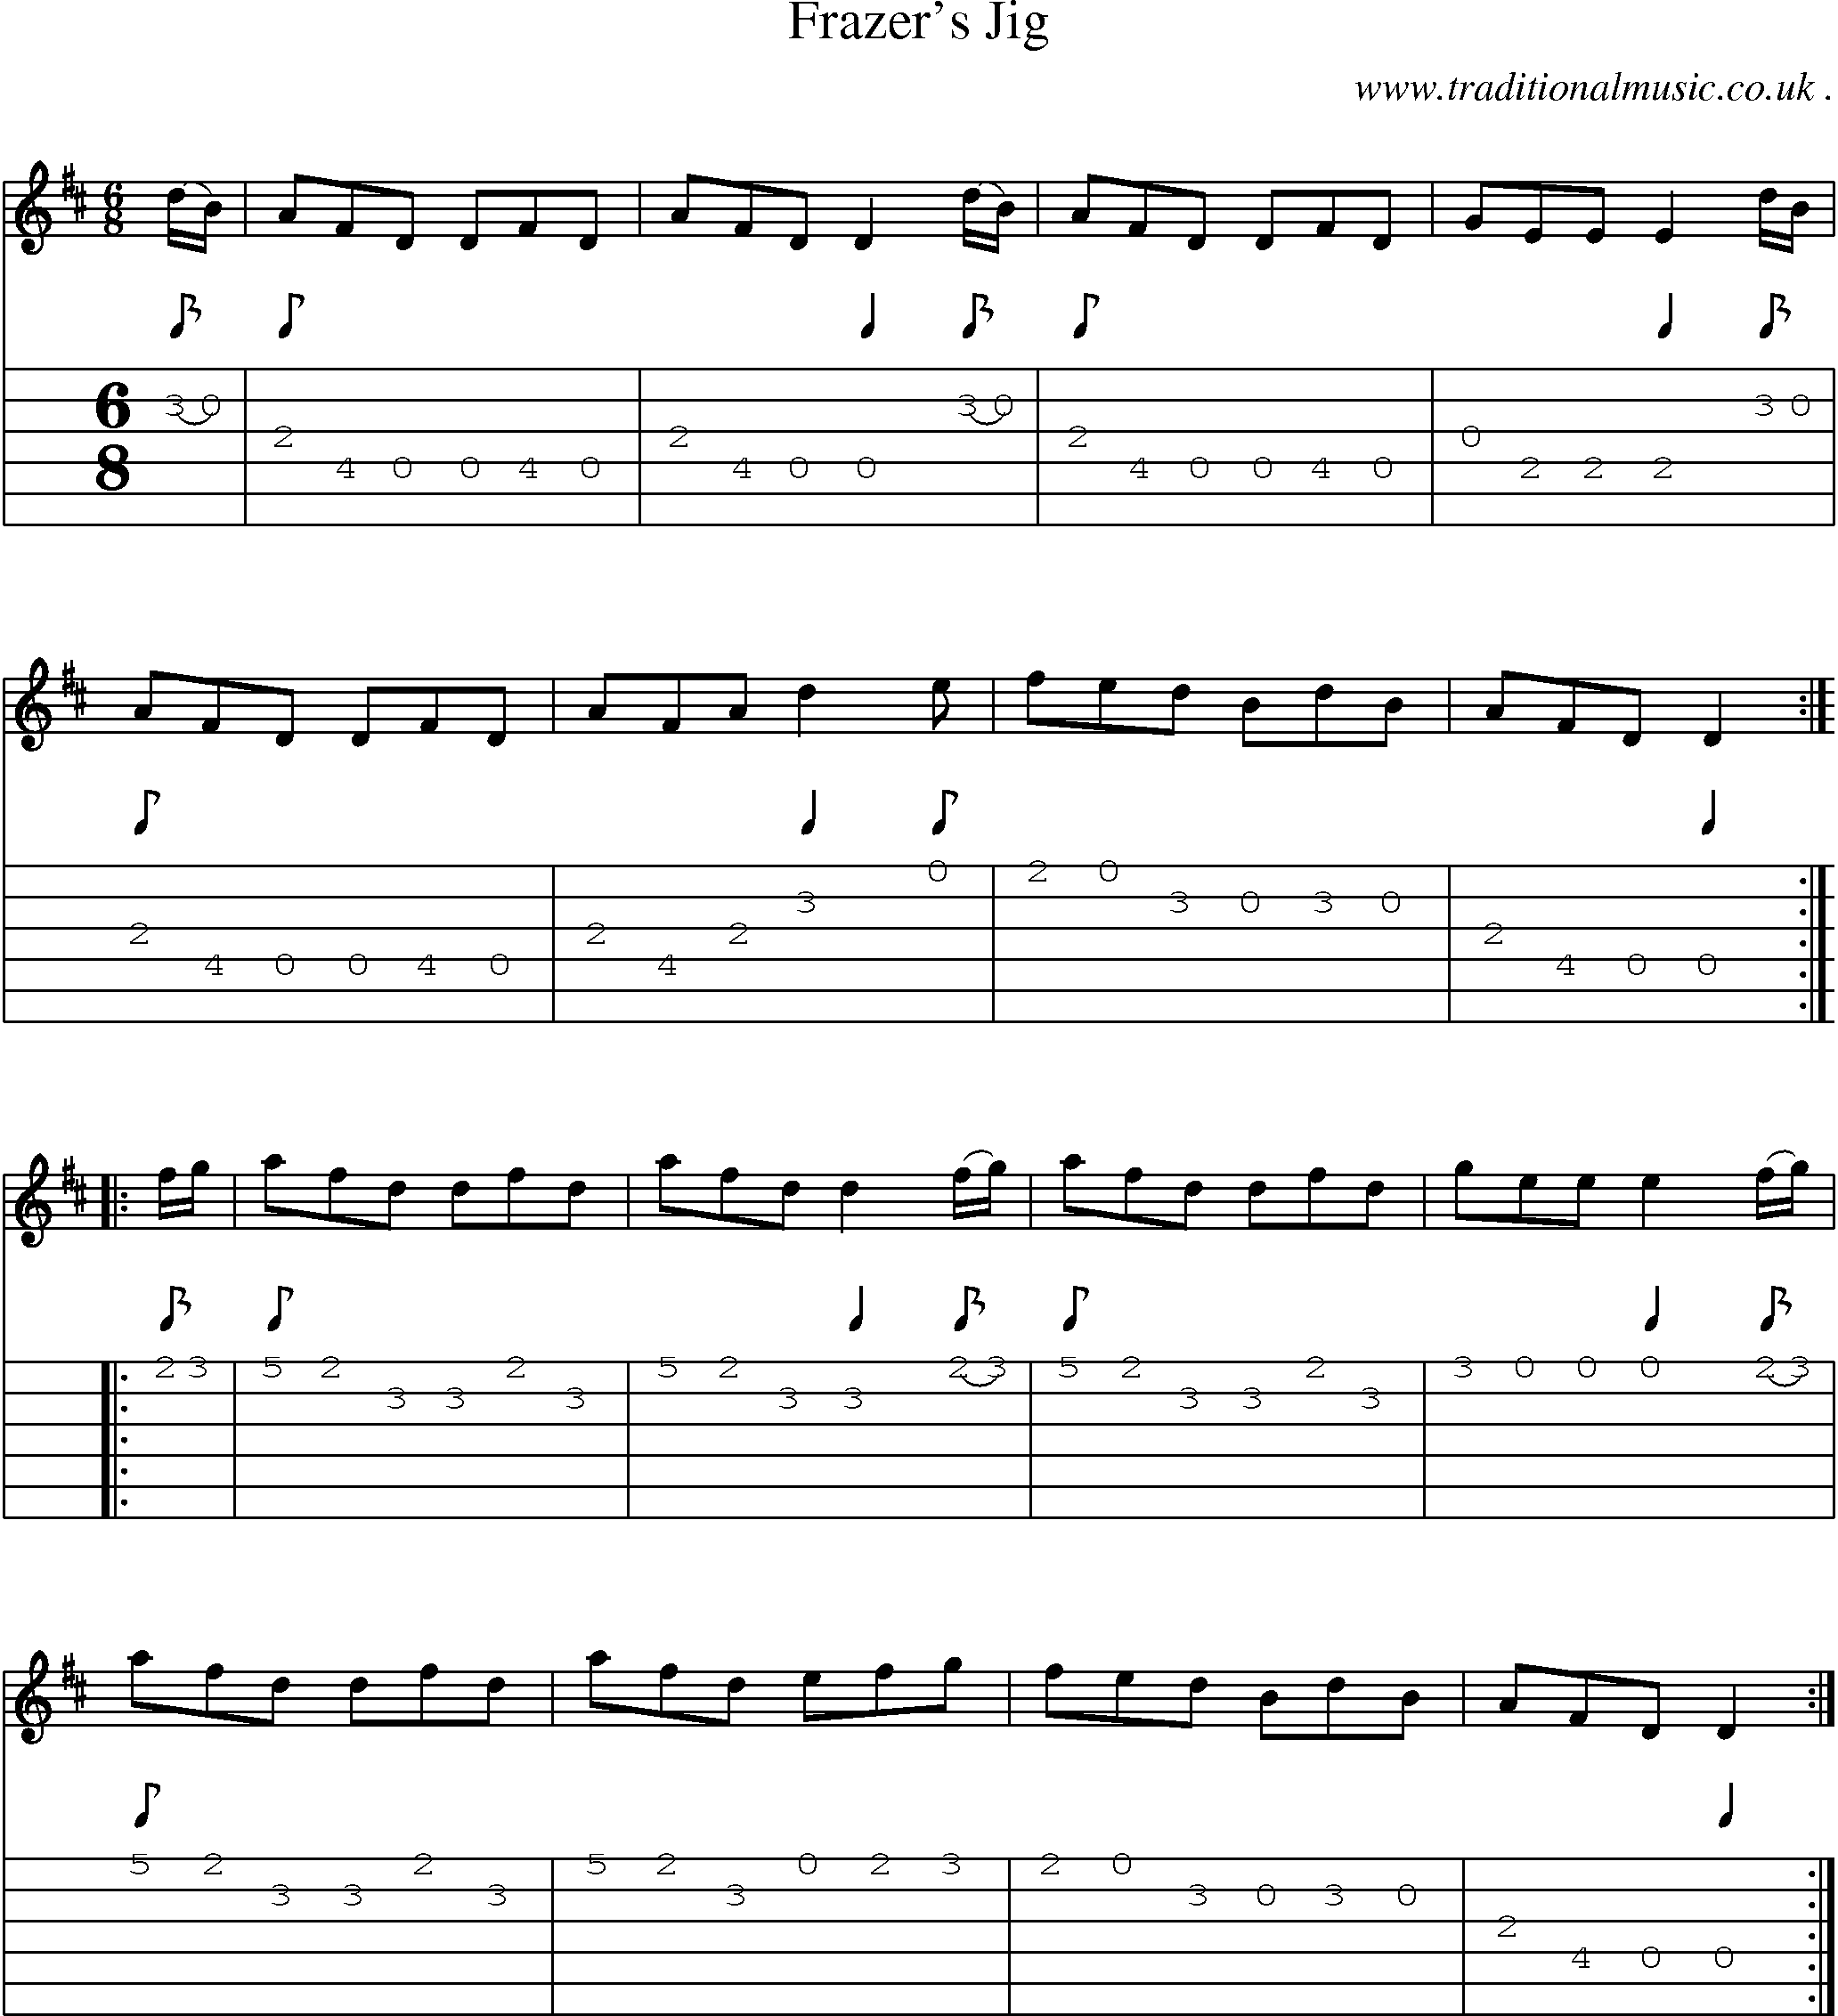 Sheet-Music and Guitar Tabs for Frazers Jig